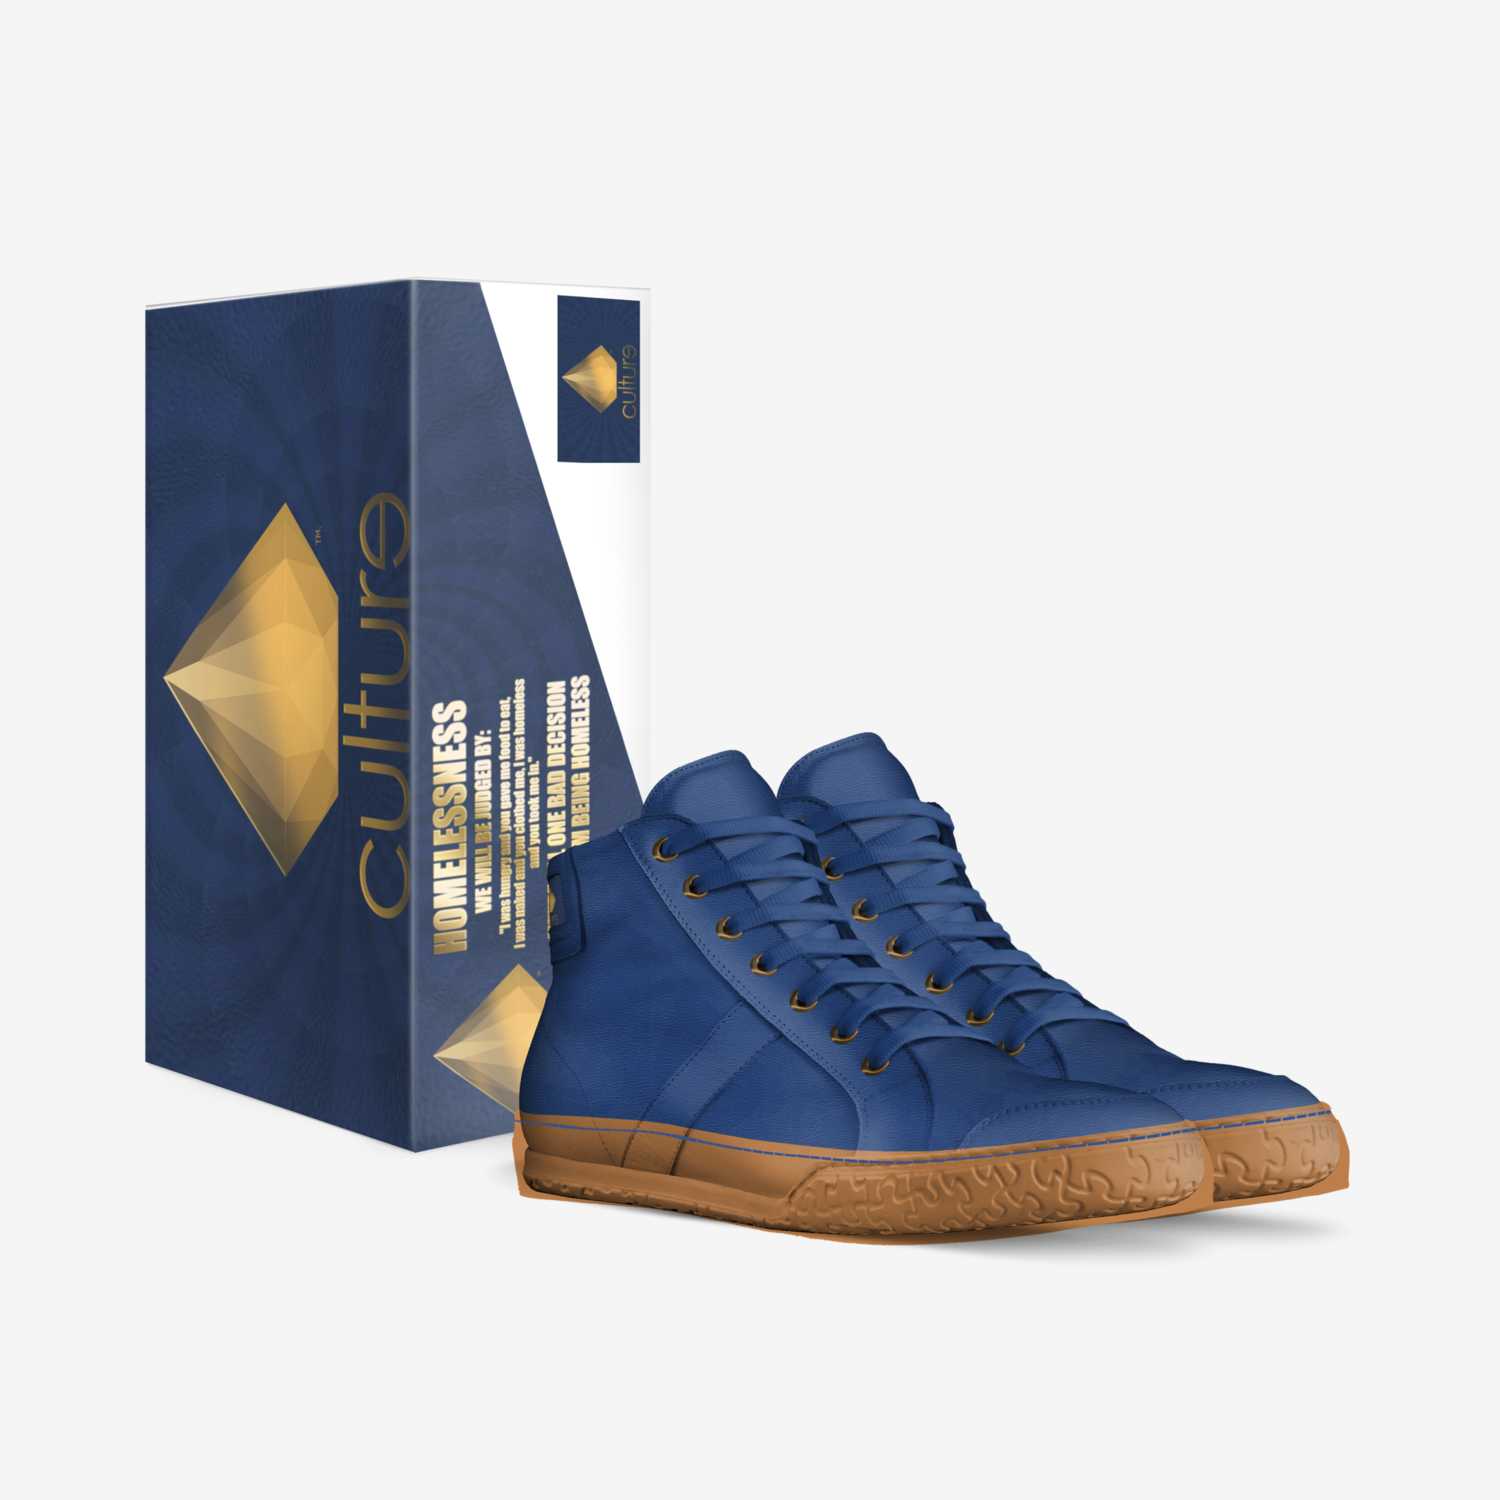 Culture custom made in Italy shoes by Edward Griffin | Box view